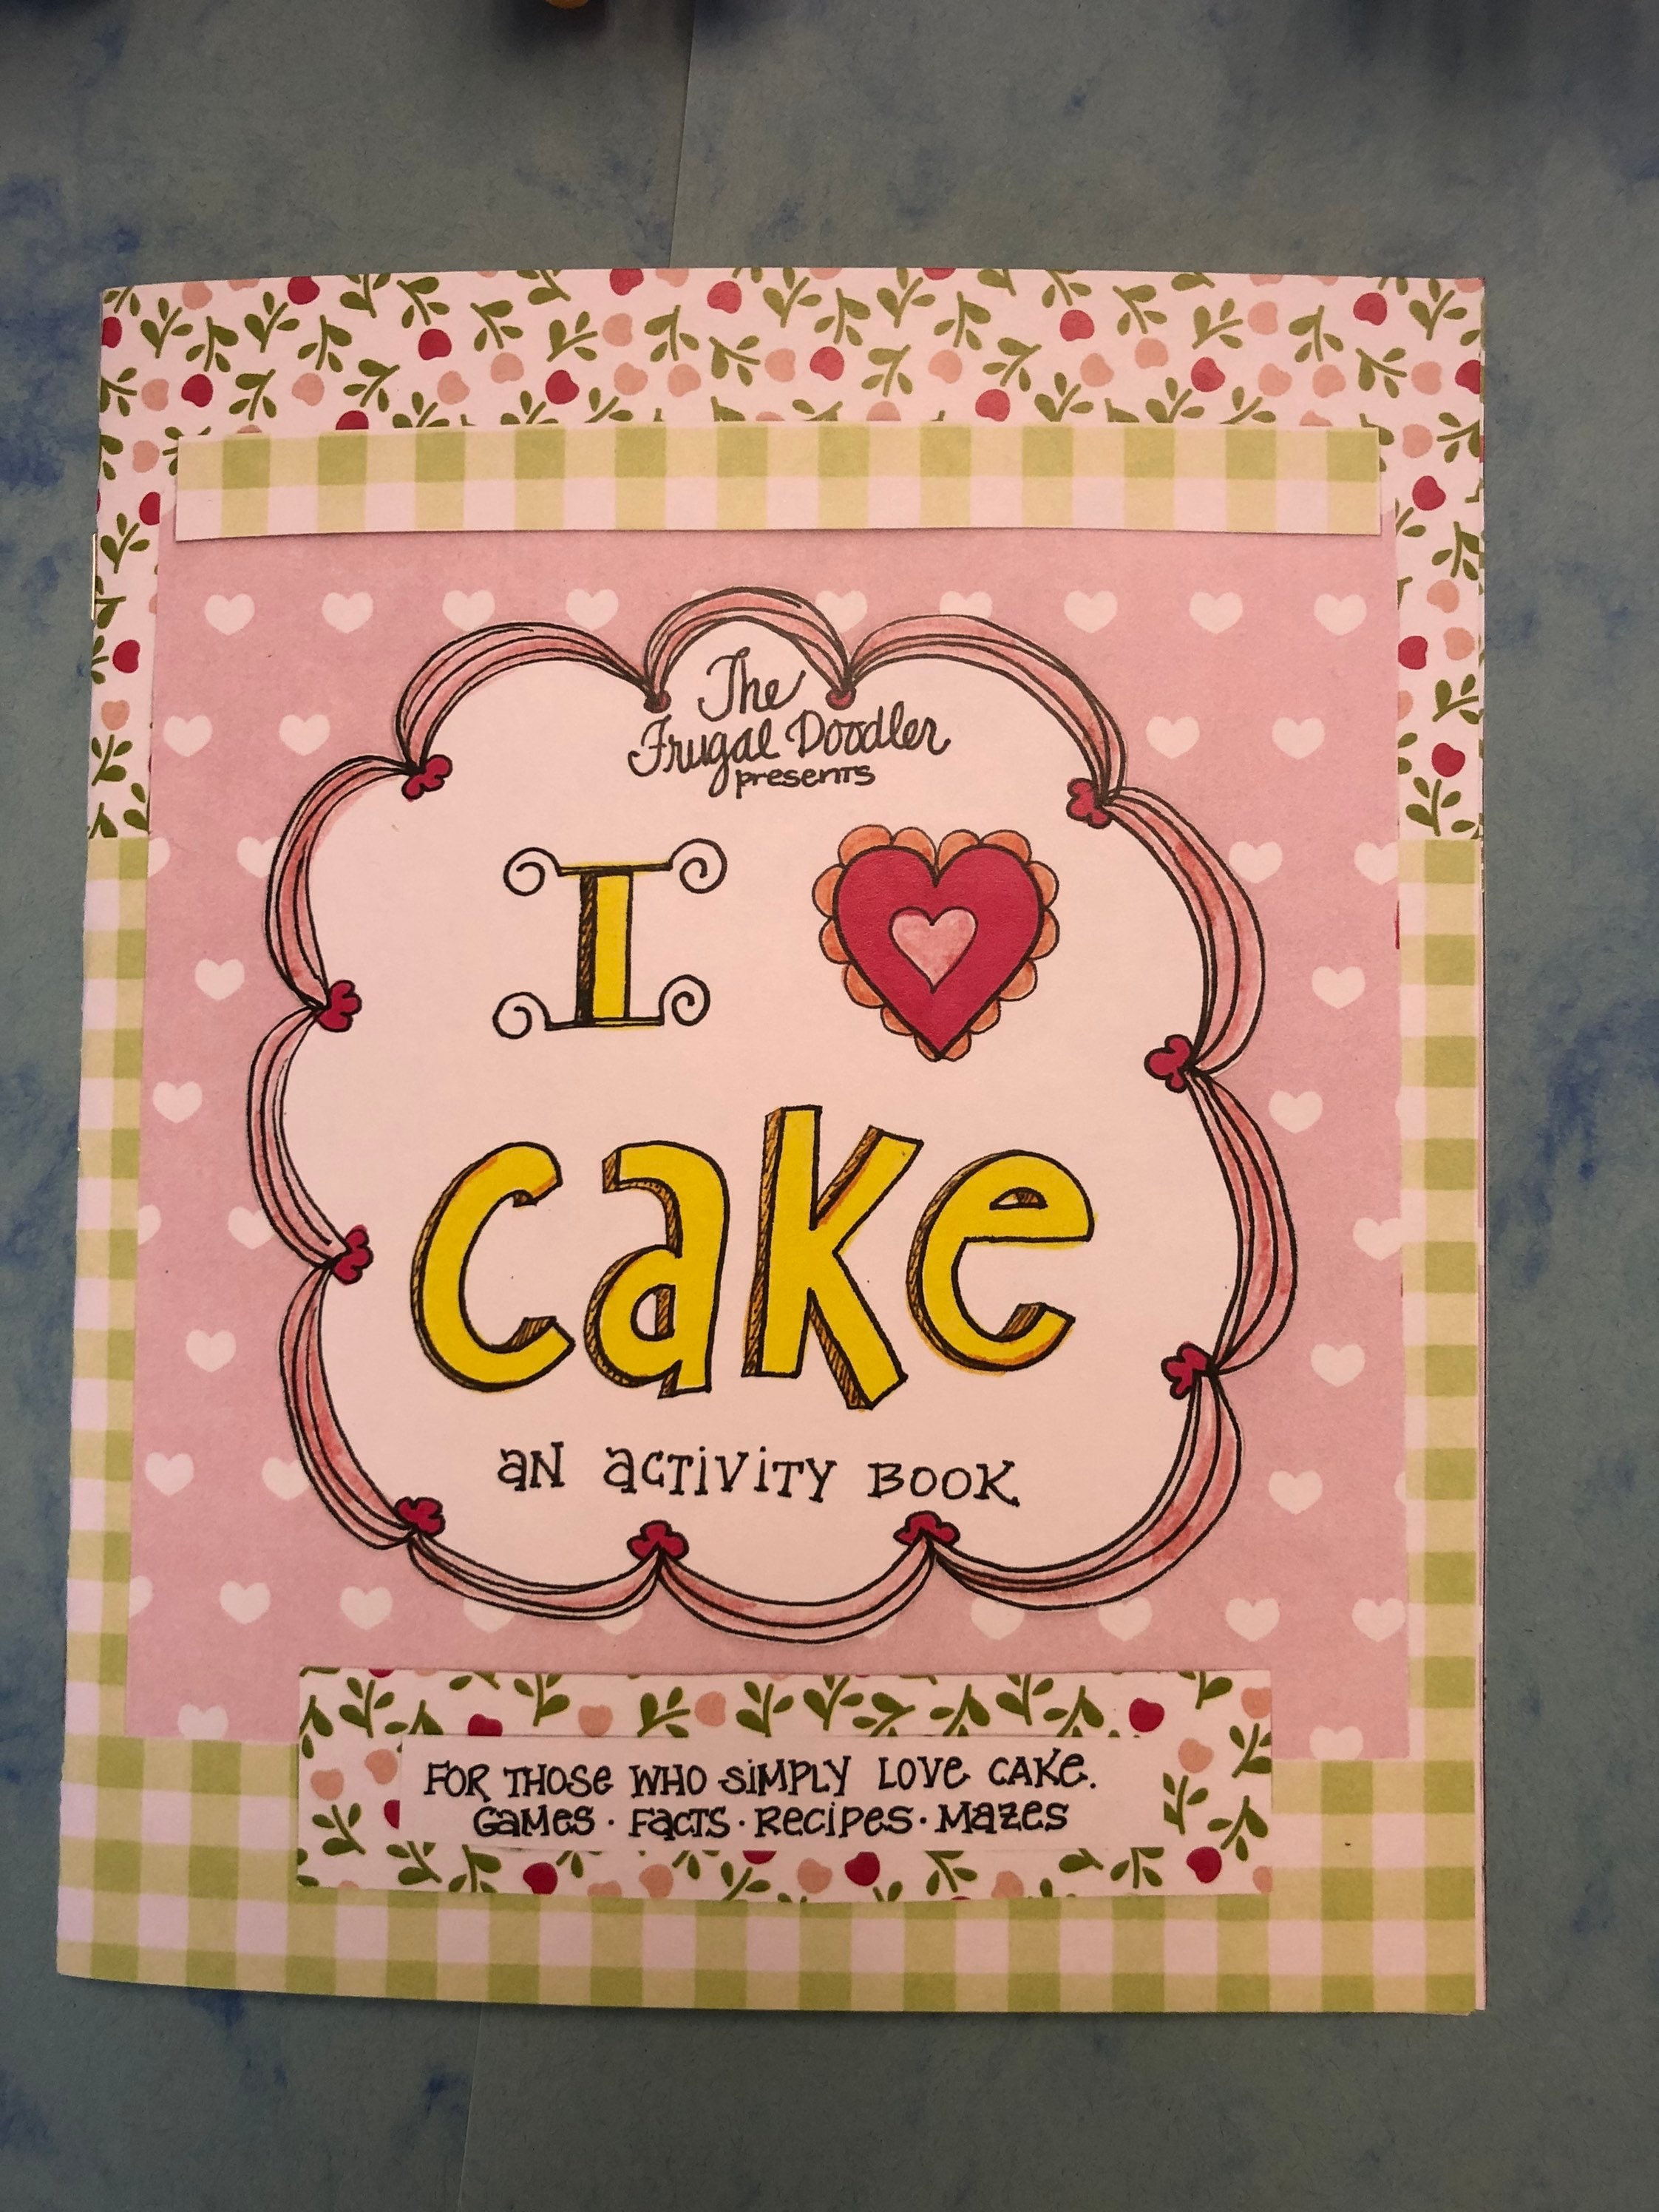 Cake activity book full color pages of word puzzles and